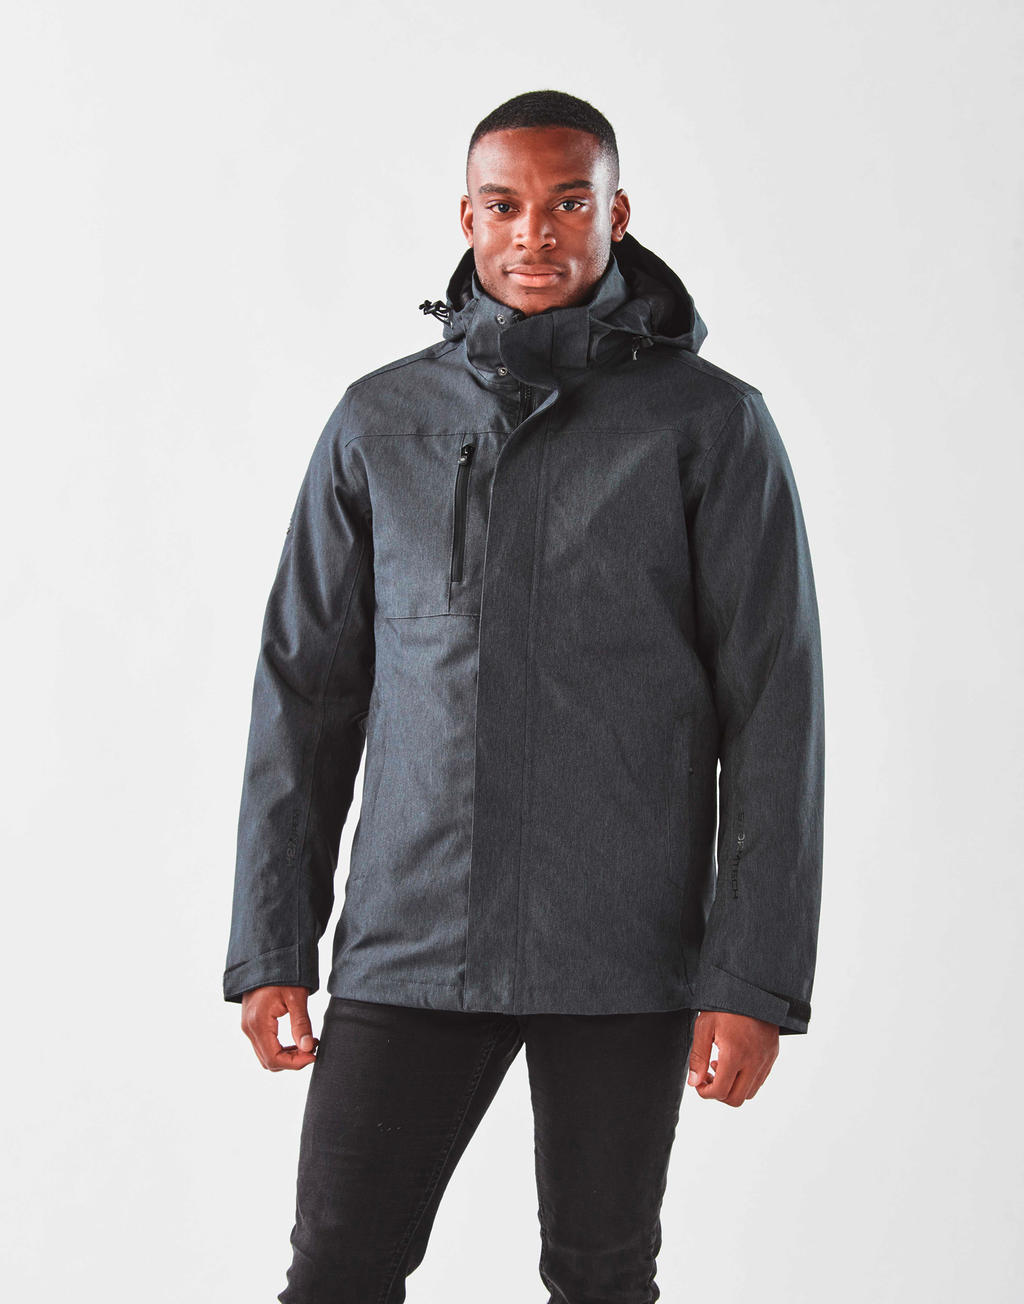  Mens Avalanche System Jacket in Farbe Black